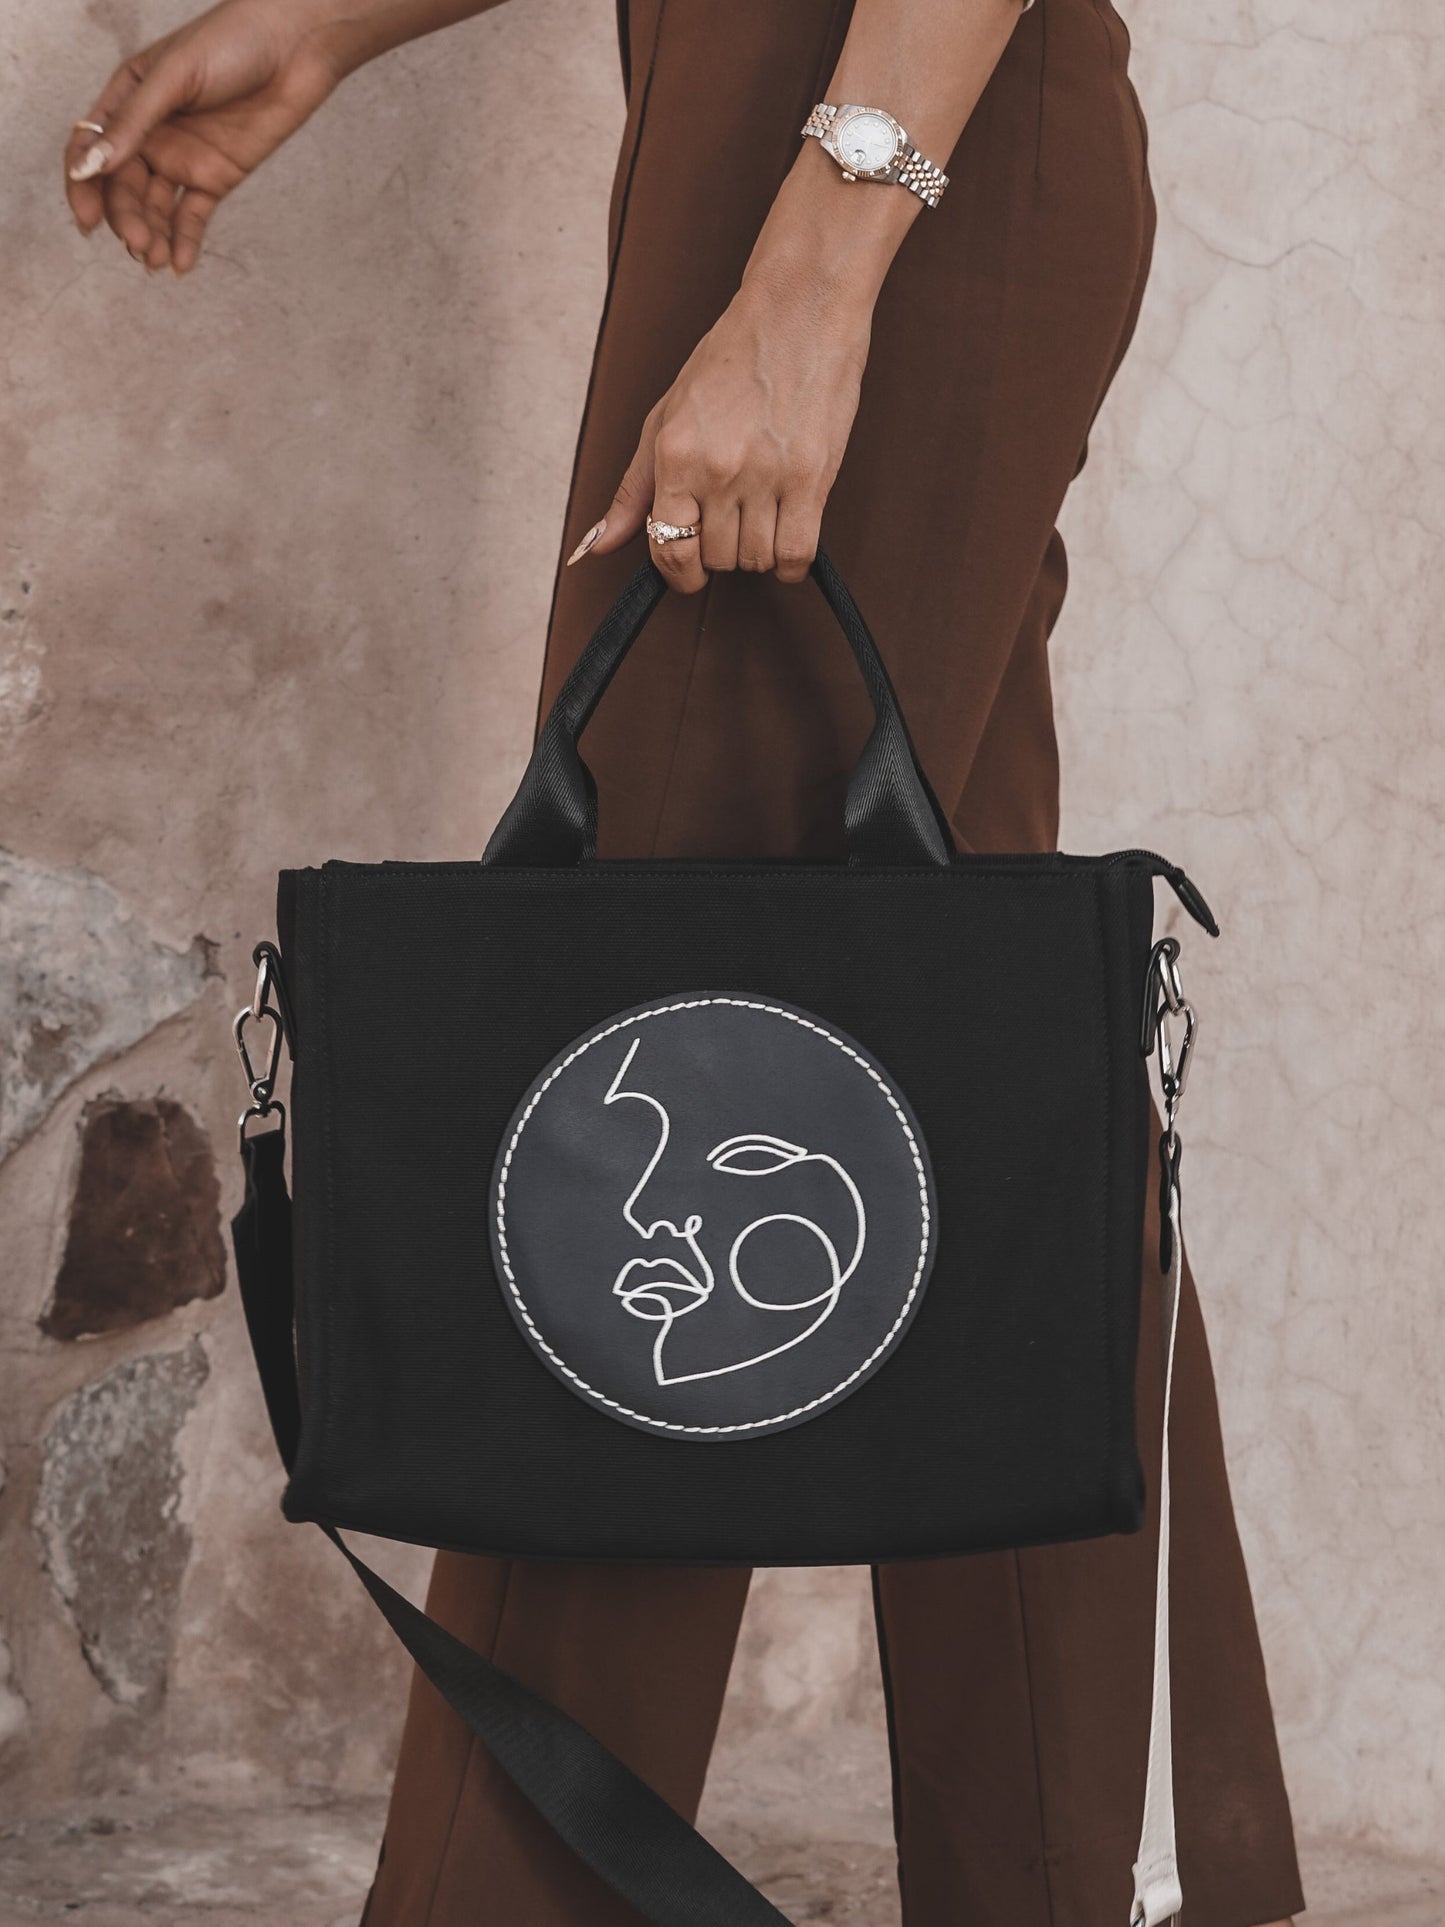 The Unseen Tote Bag